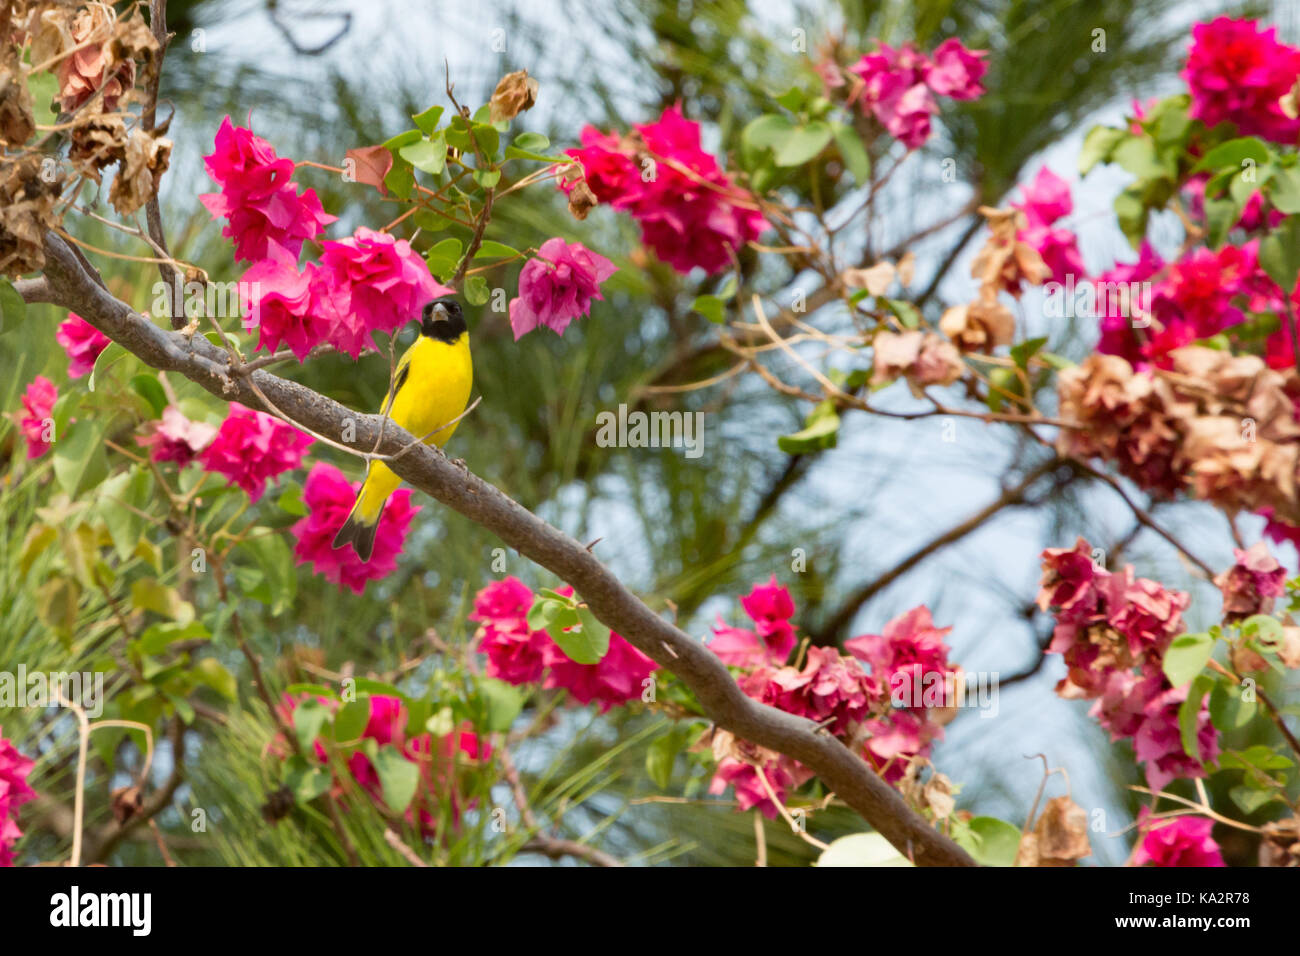 Asuncion, Paraguay. 24th Sep, 2017. A warm spring day in Asuncion with temperatures high around 30°C as a male hooded siskin (Spinus magellanicus) passerine bird rests briefly on purple bougainvillea or 'Santa Rita' ornamental vine branch during sunny afternoon. Credit: Andre M. Chang/ARDUOPRESS/Alamy Live News Stock Photo